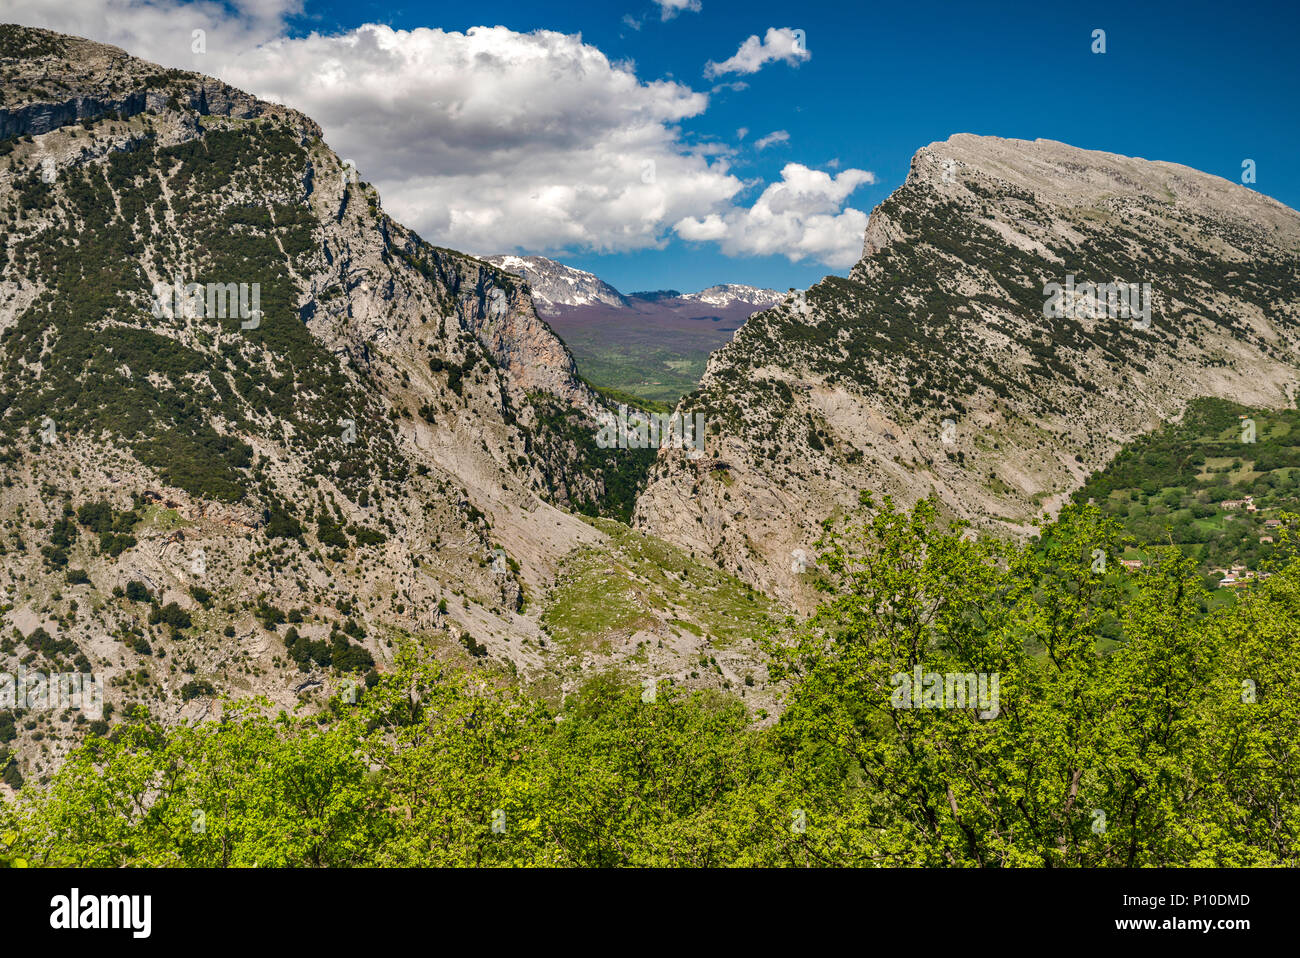 Gole del Raganello (Raganello Canyon), view from San Lorenzo Bellizzi, Southern Apennines, Pollino National Park, Calabria, Italy Stock Photo